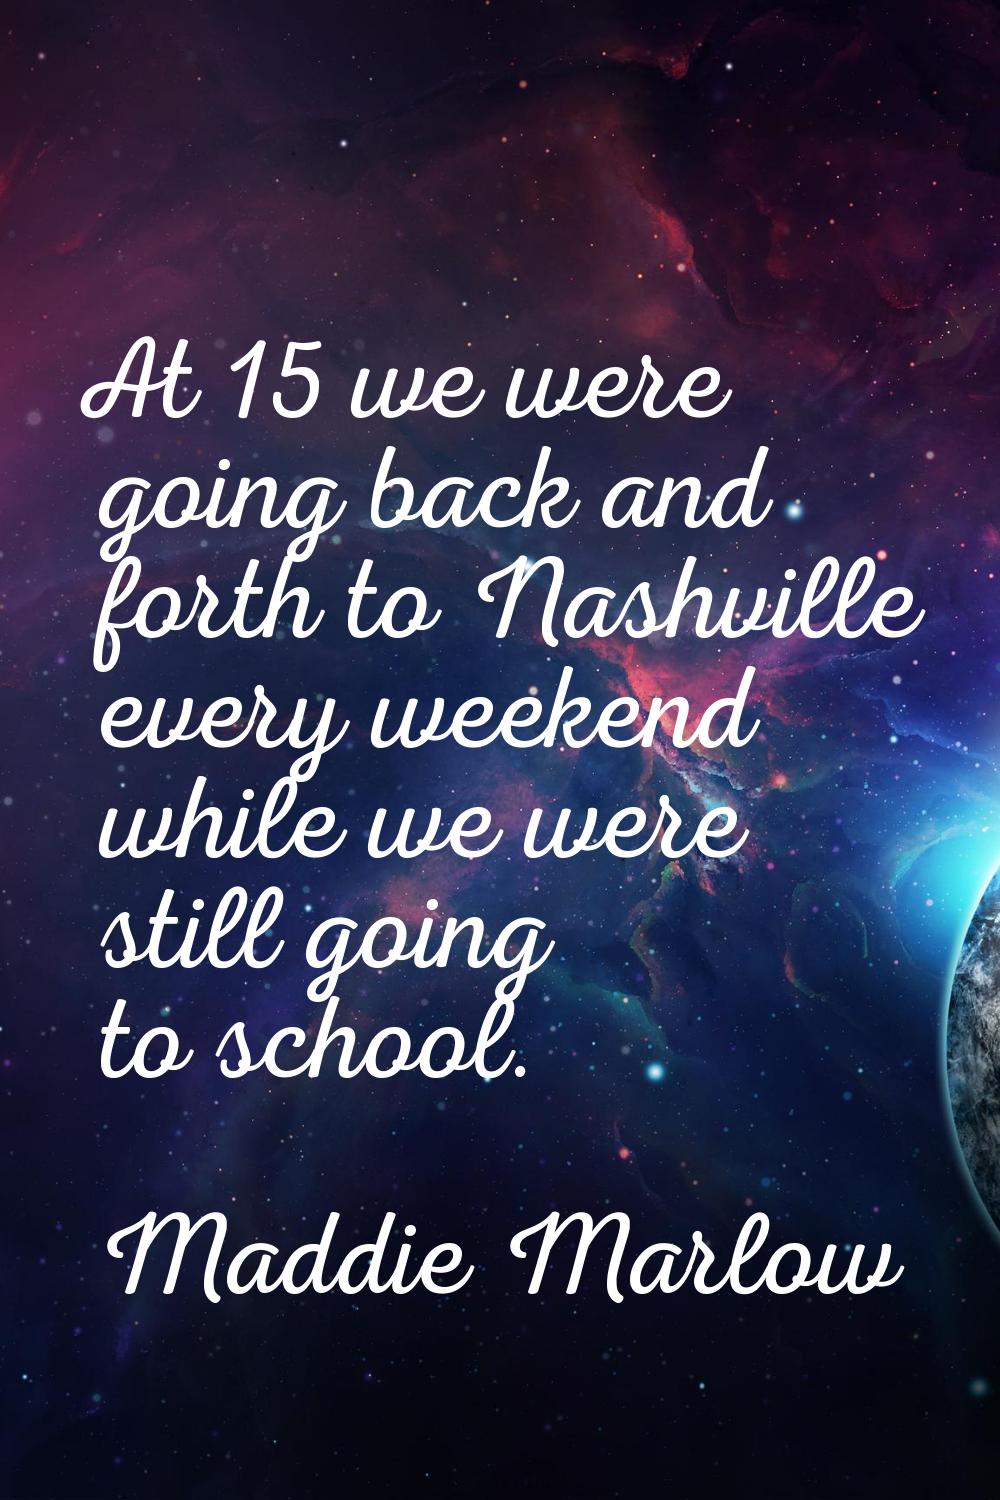 At 15 we were going back and forth to Nashville every weekend while we were still going to school.